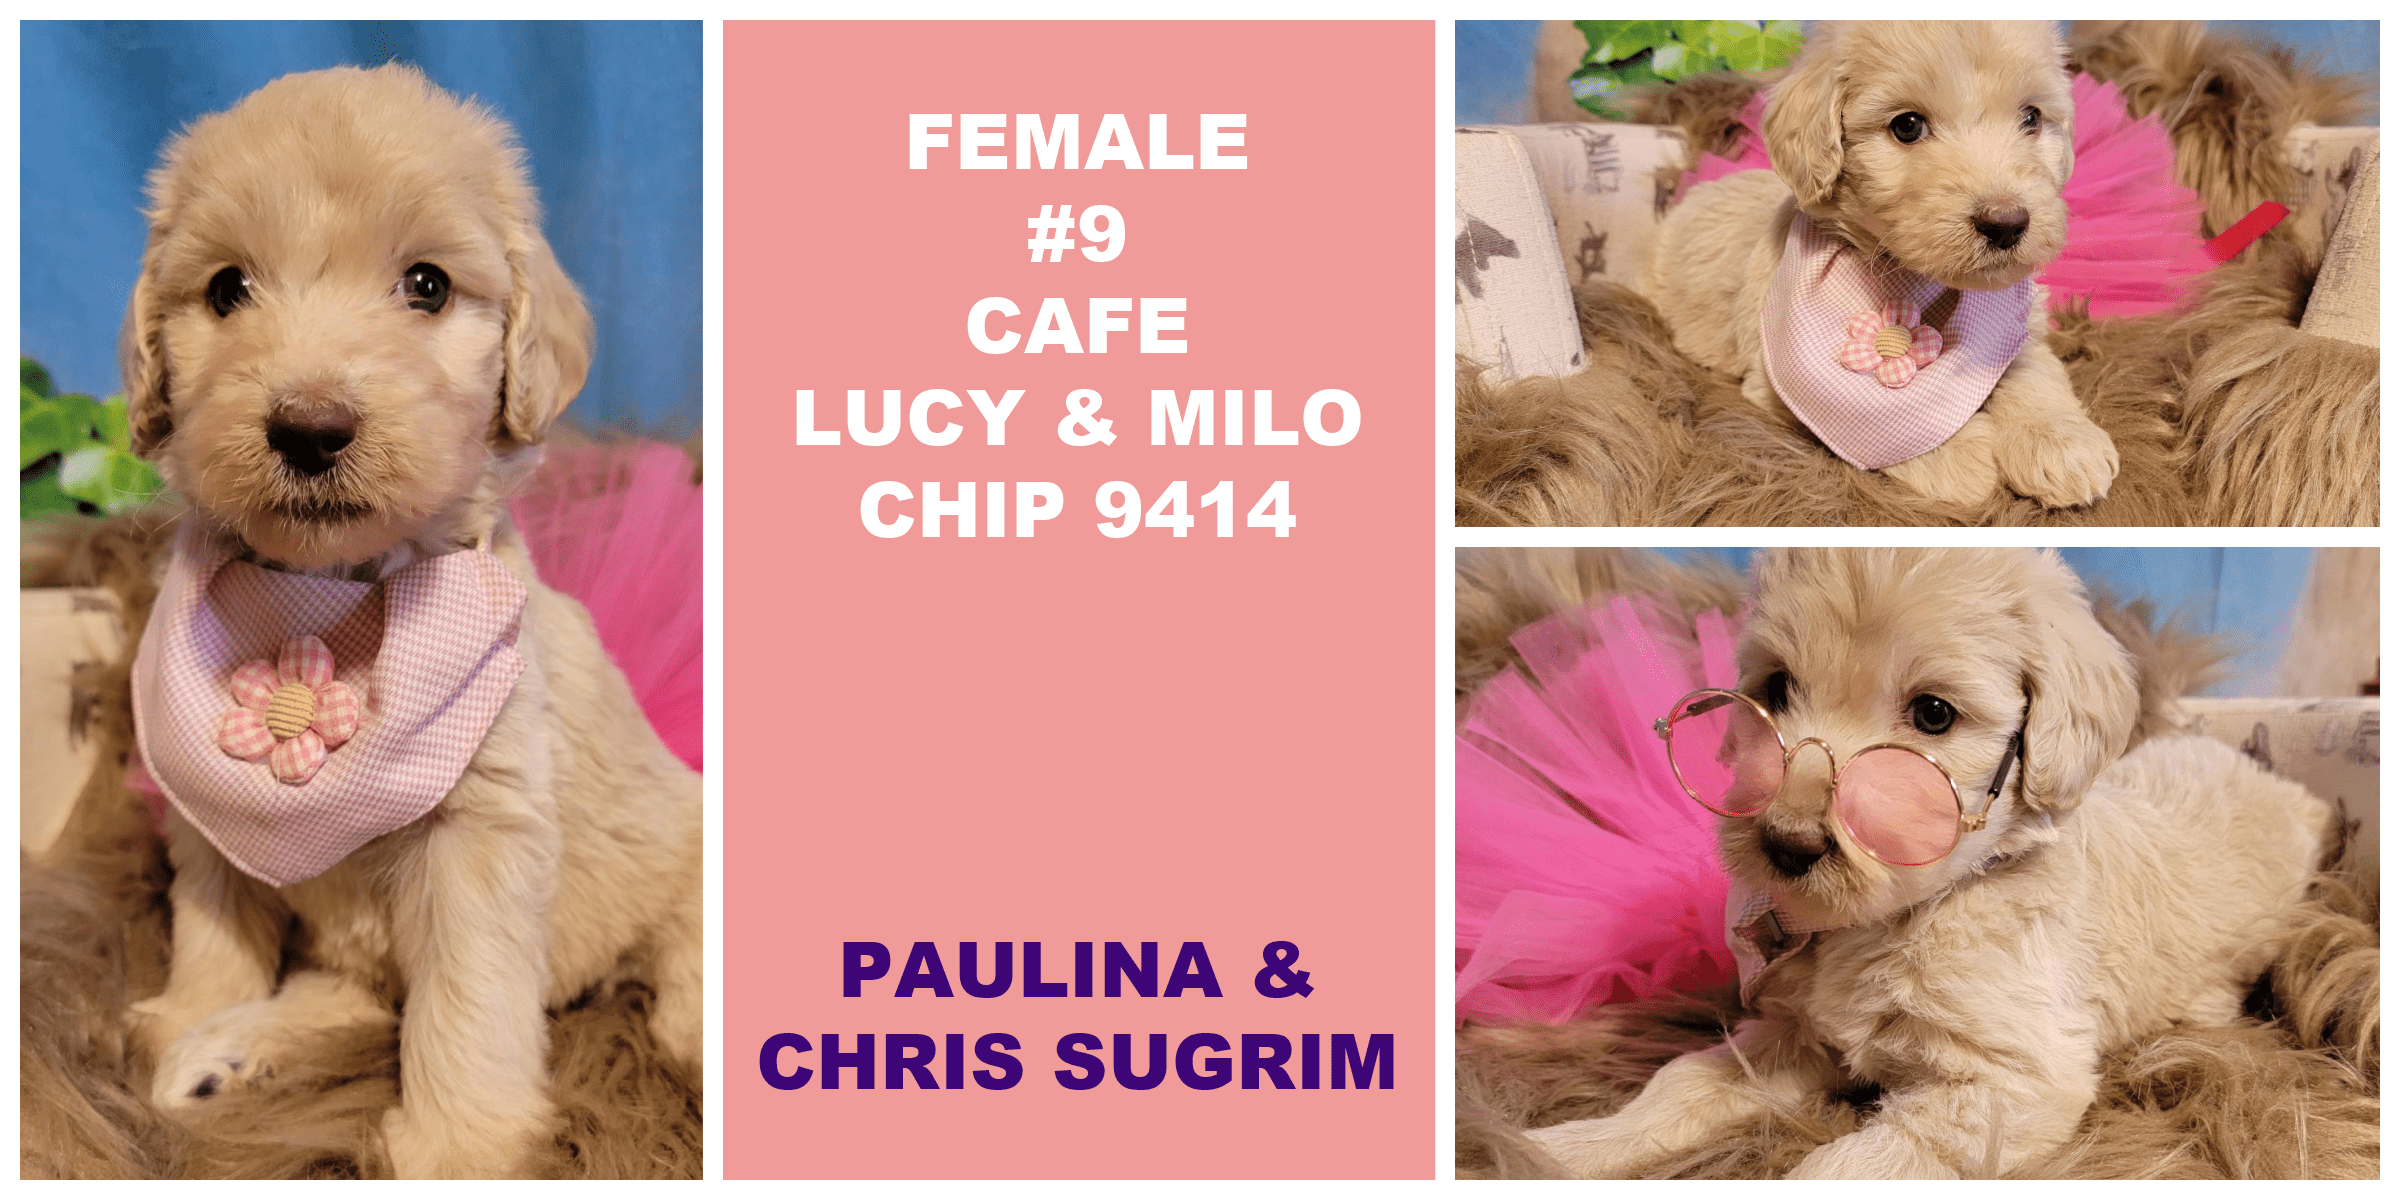 FEMALE 9 CAFE LUCY MILO CHIP 9414